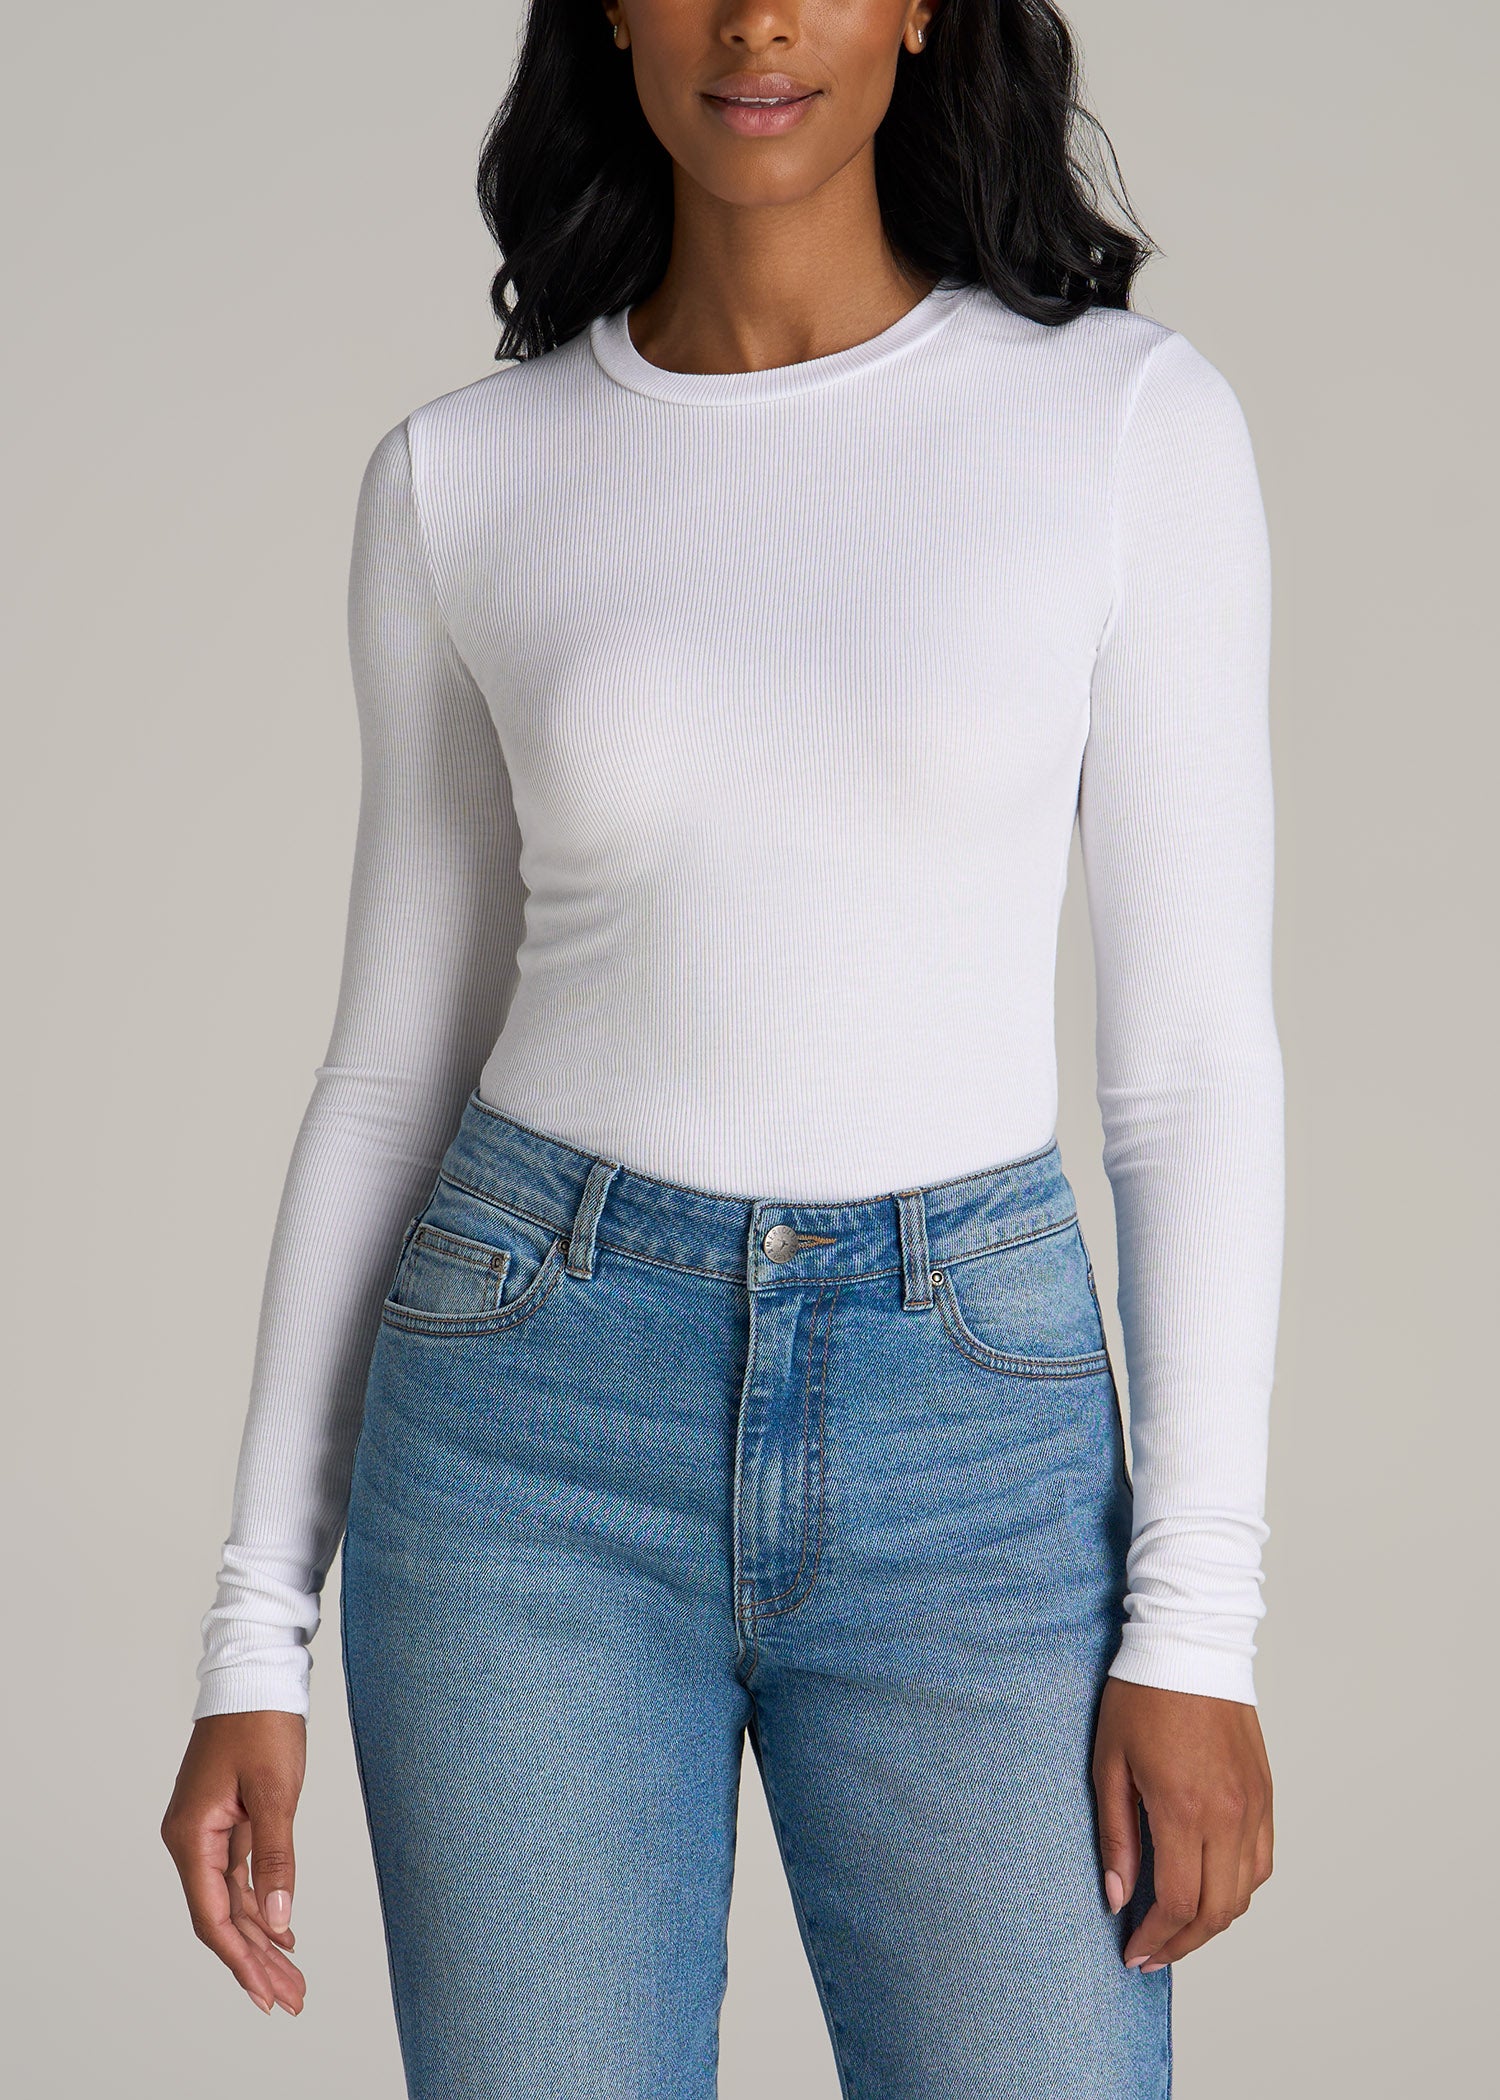 RIBBED MODAL CUT-OUT SHOULDER LONGSLEEVE - OFF WHITE